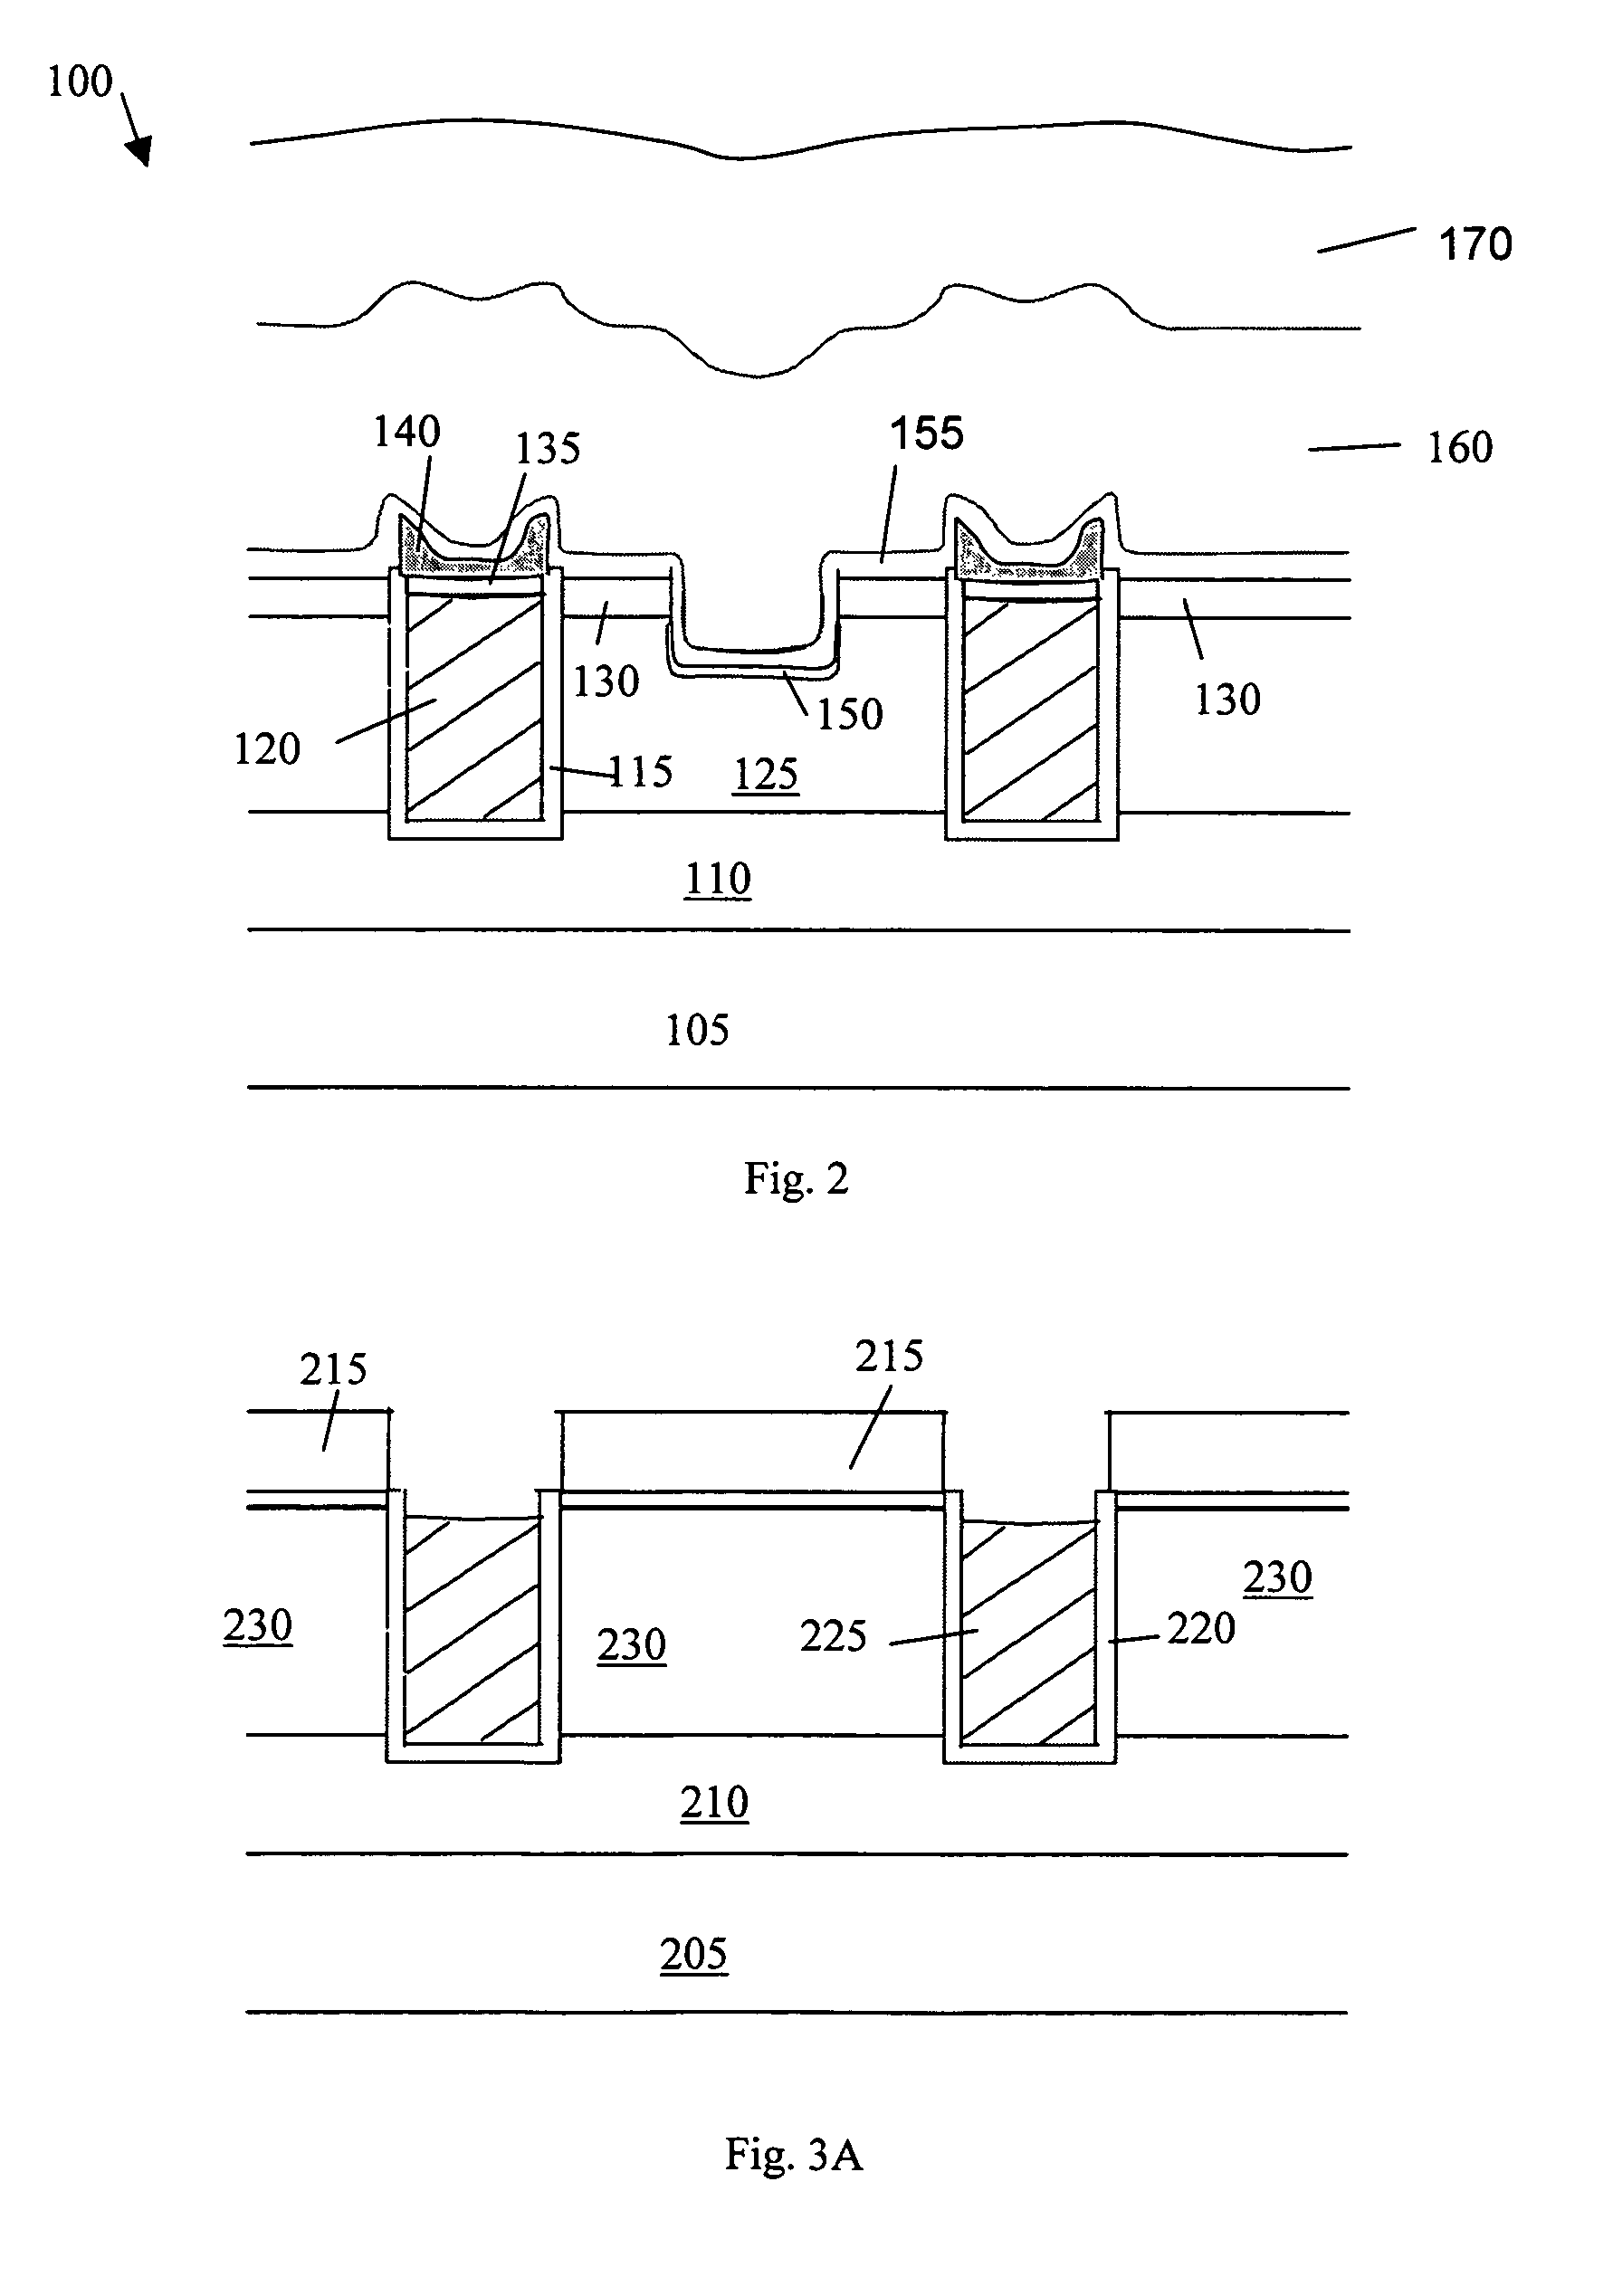 Device configuration of asymmetrical DMOSFET with schottky barrier source